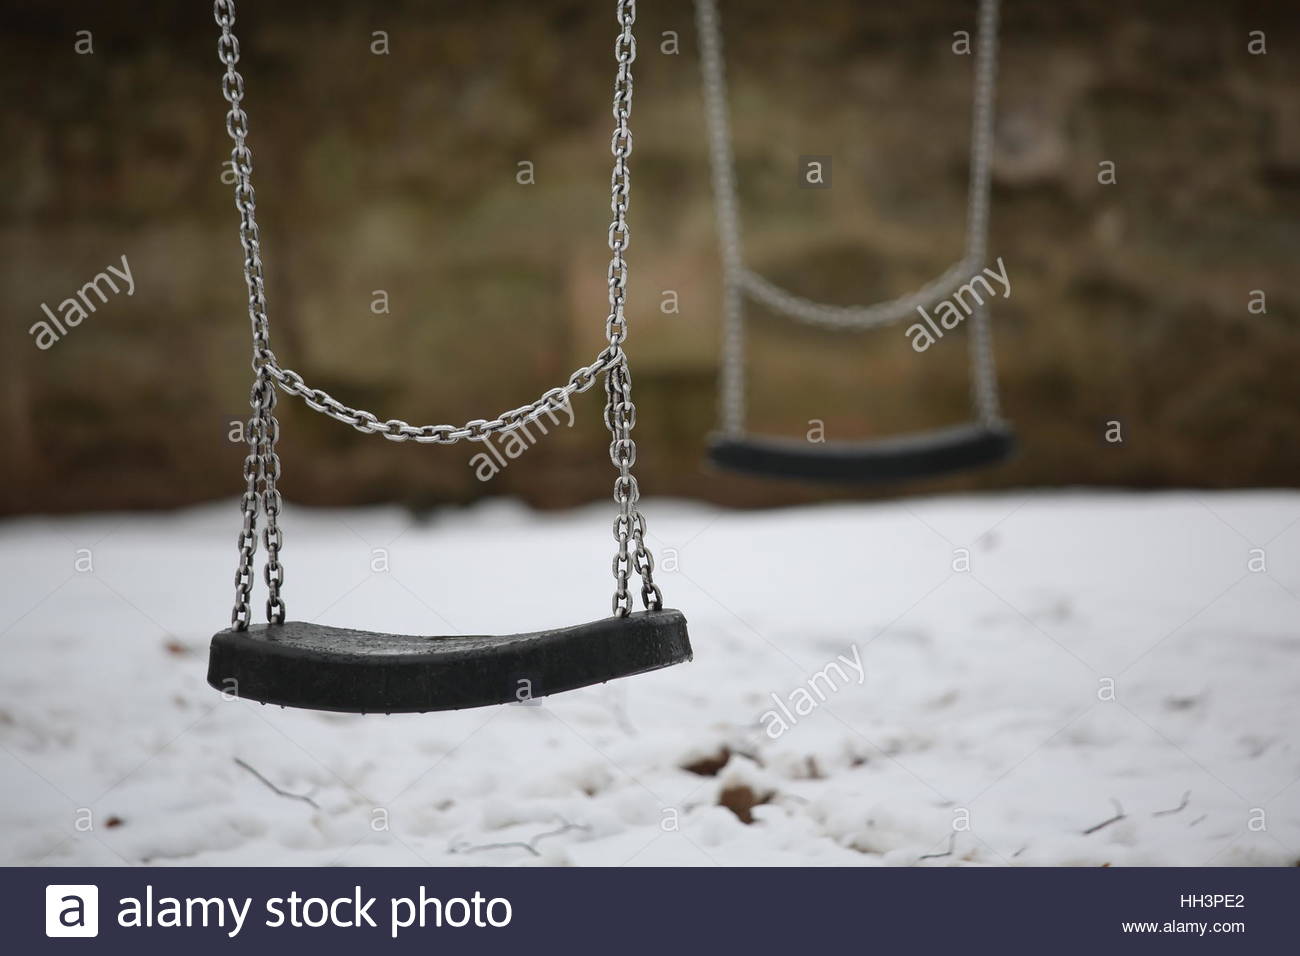 Swings in daylight during winter hang unused with snow on the ground Stock Photo